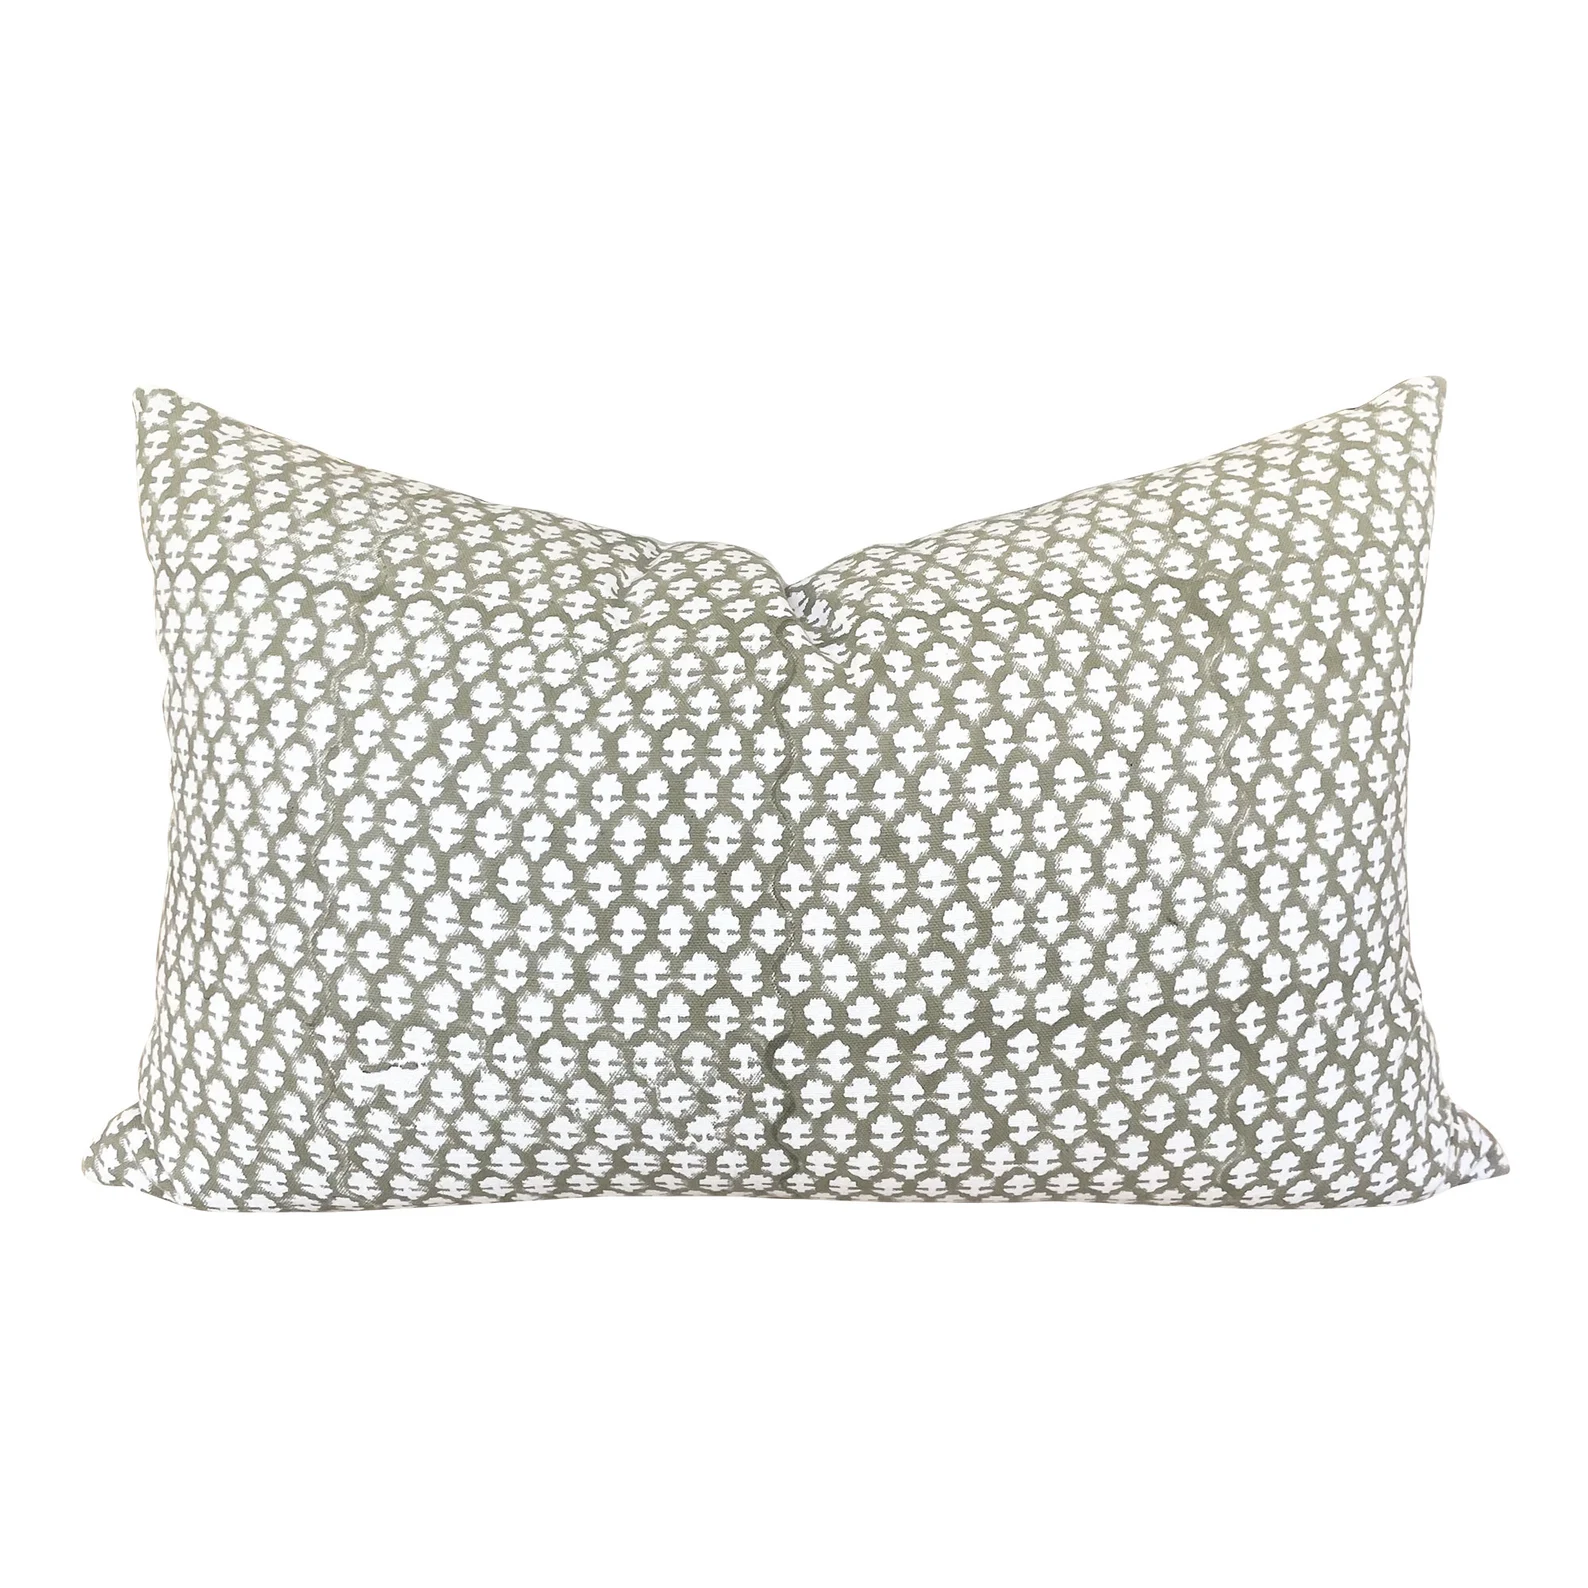 Amera Pillow Cover